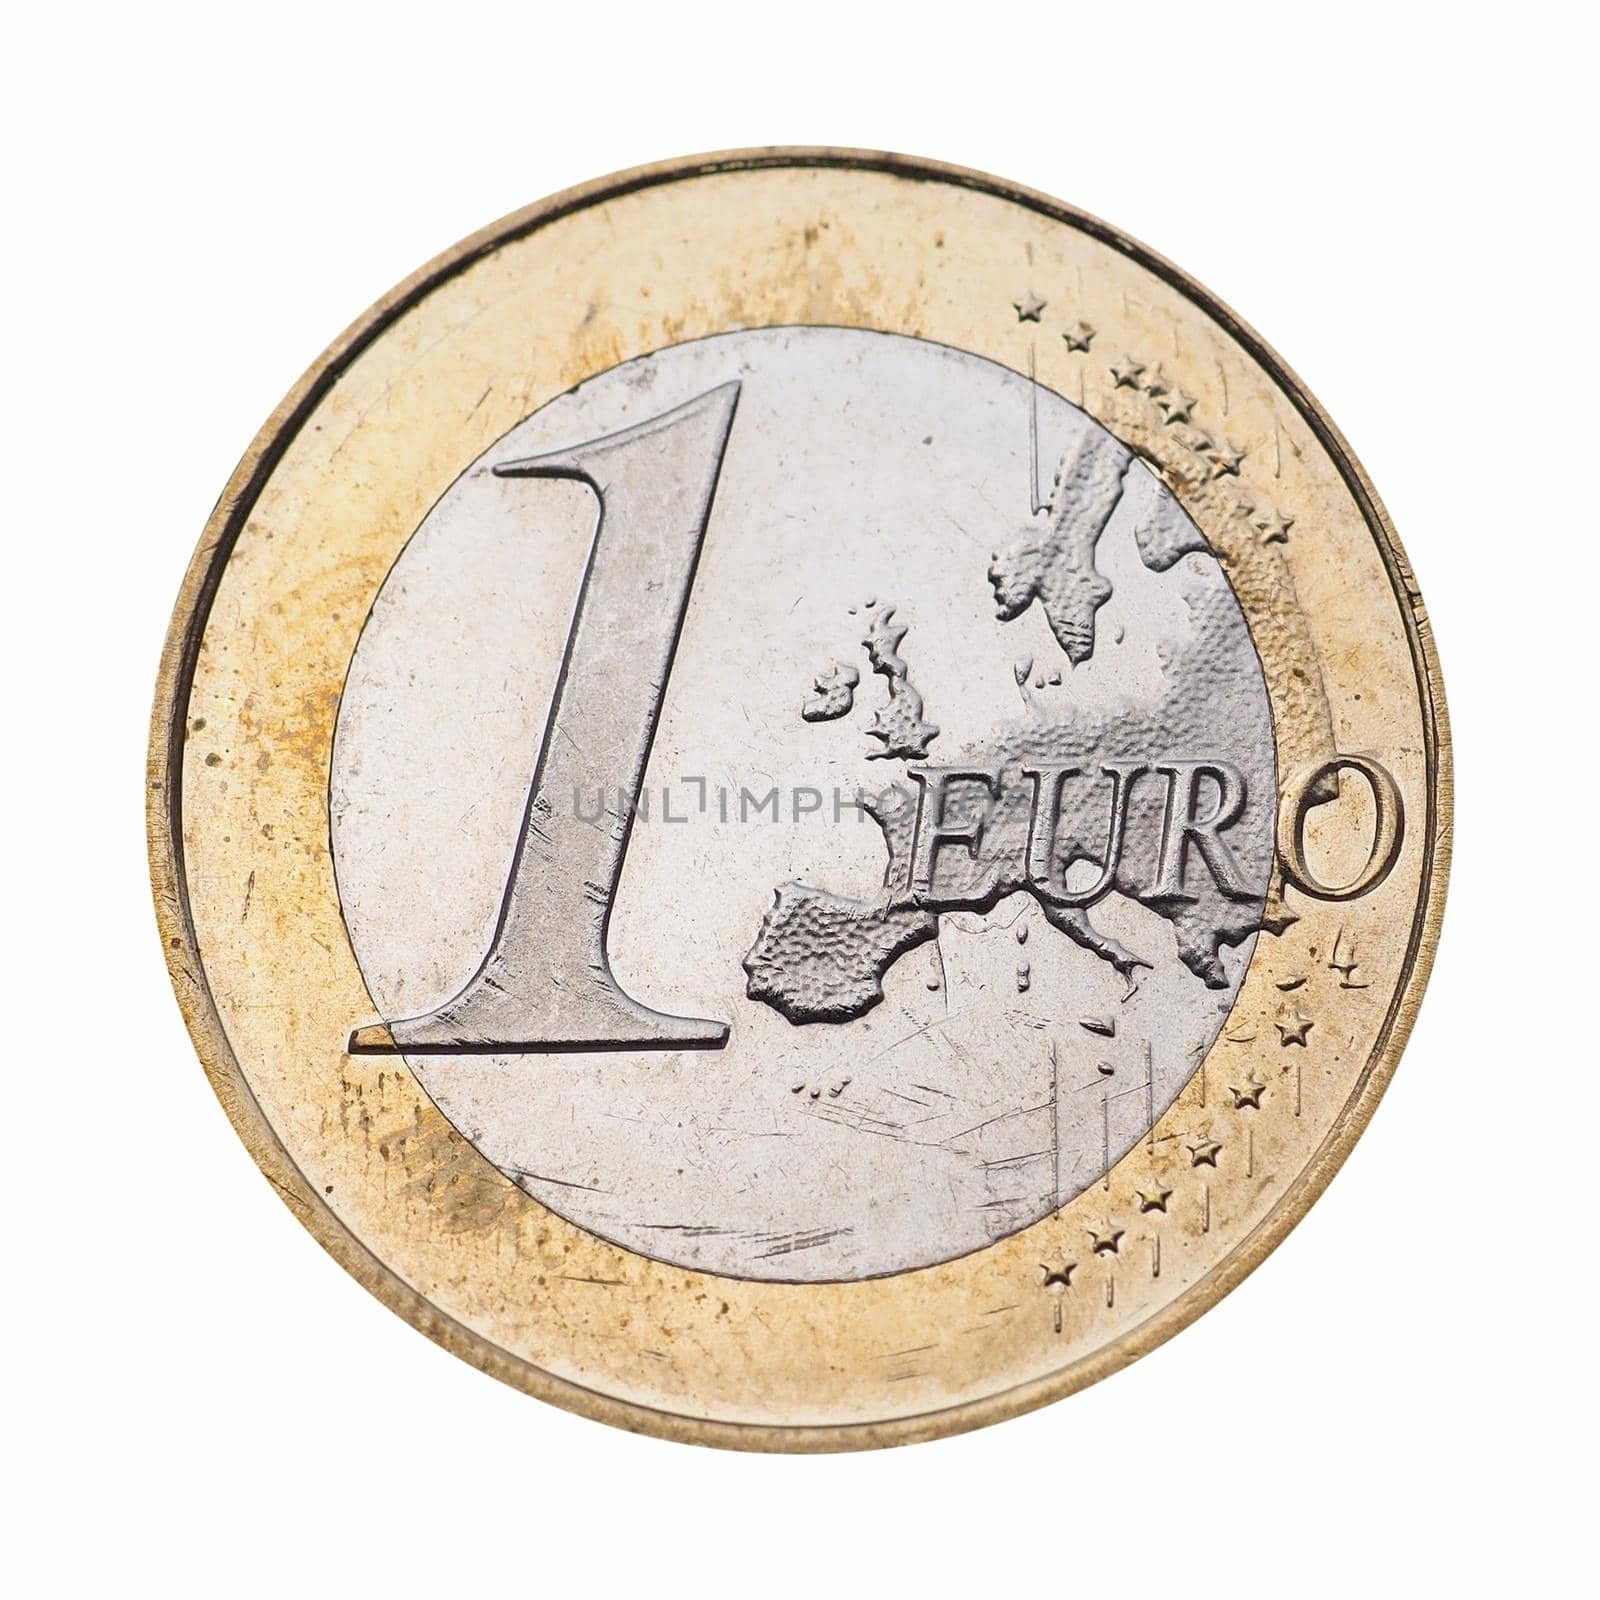 1 euro coin money (EUR), currency of European Union isolated over white background